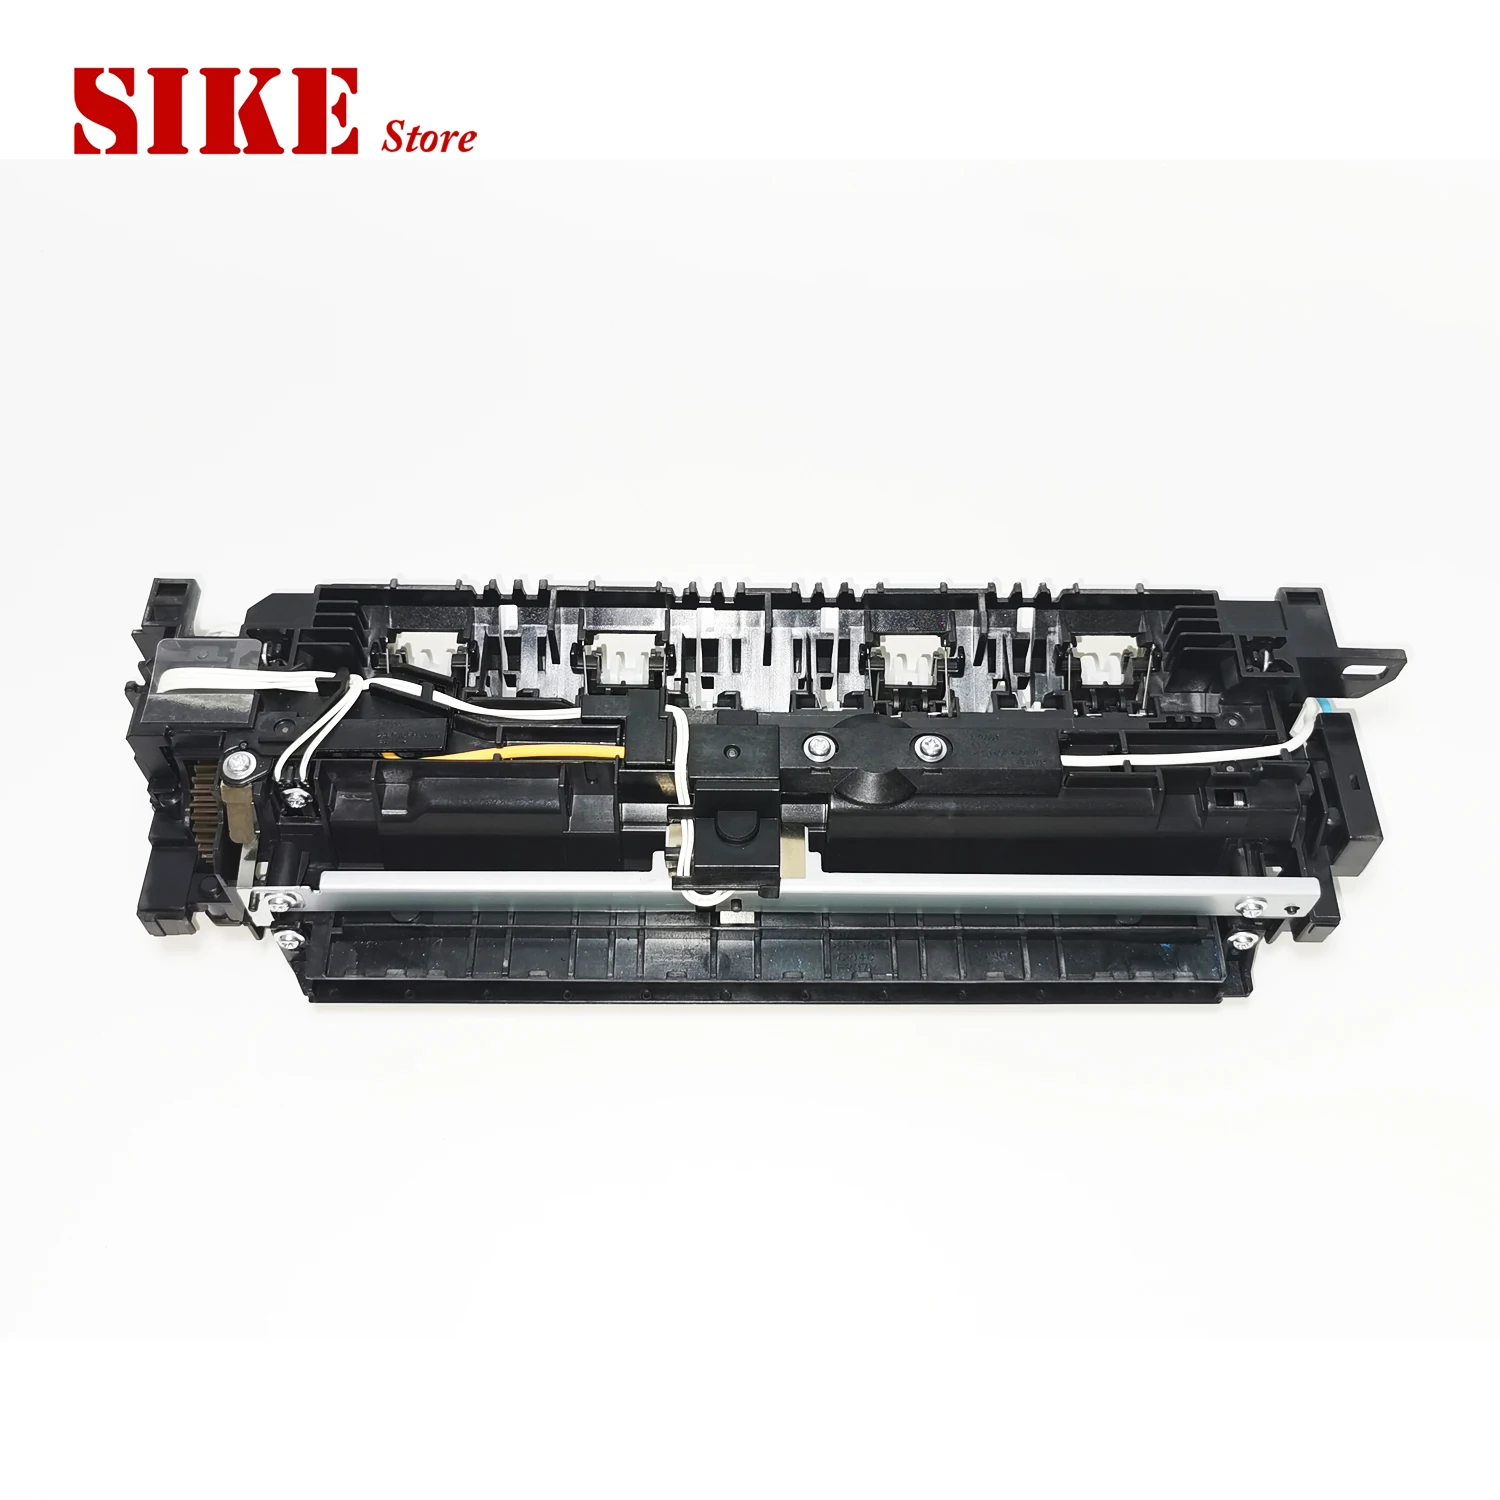 Assy  Brother DCP-9015CDW DCP-9020CDW DCP-9020CN DCP-9015 9015 9020   LY6753001 LY6754001